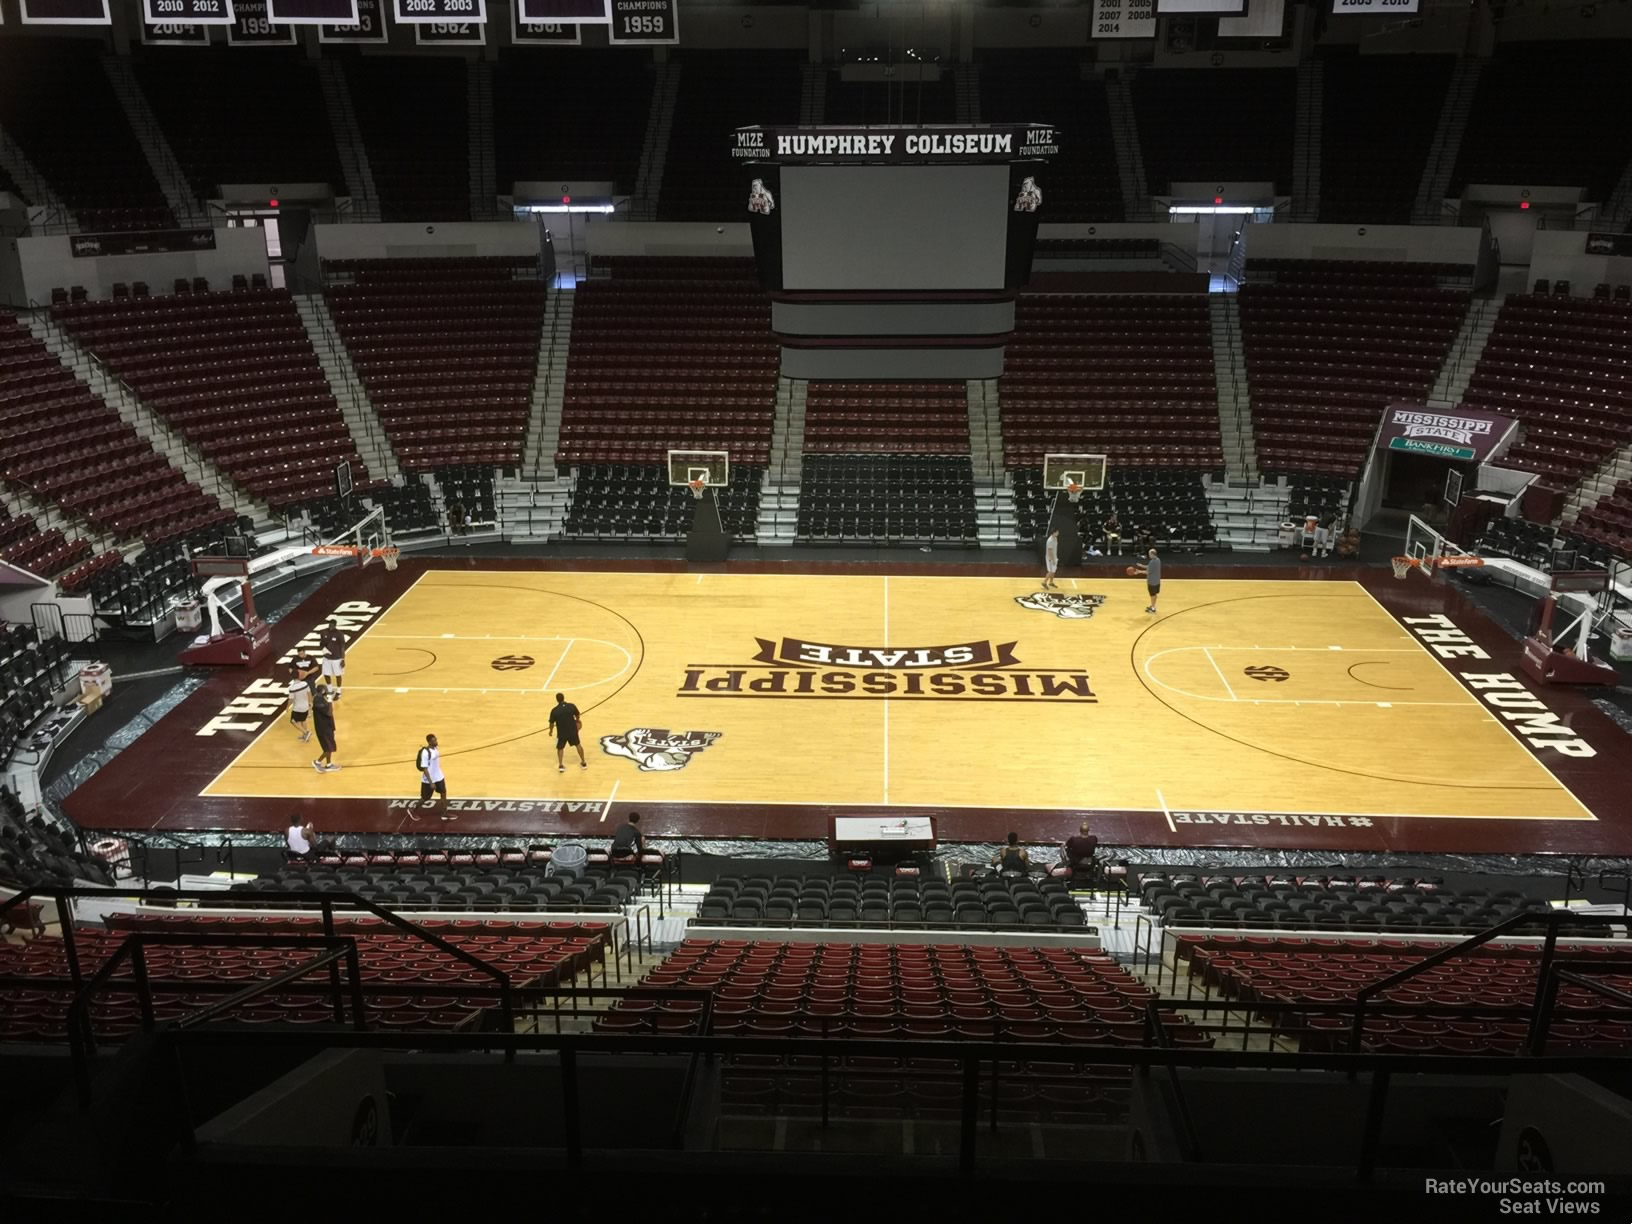 section 228, row 8 seat view  - humphrey coliseum